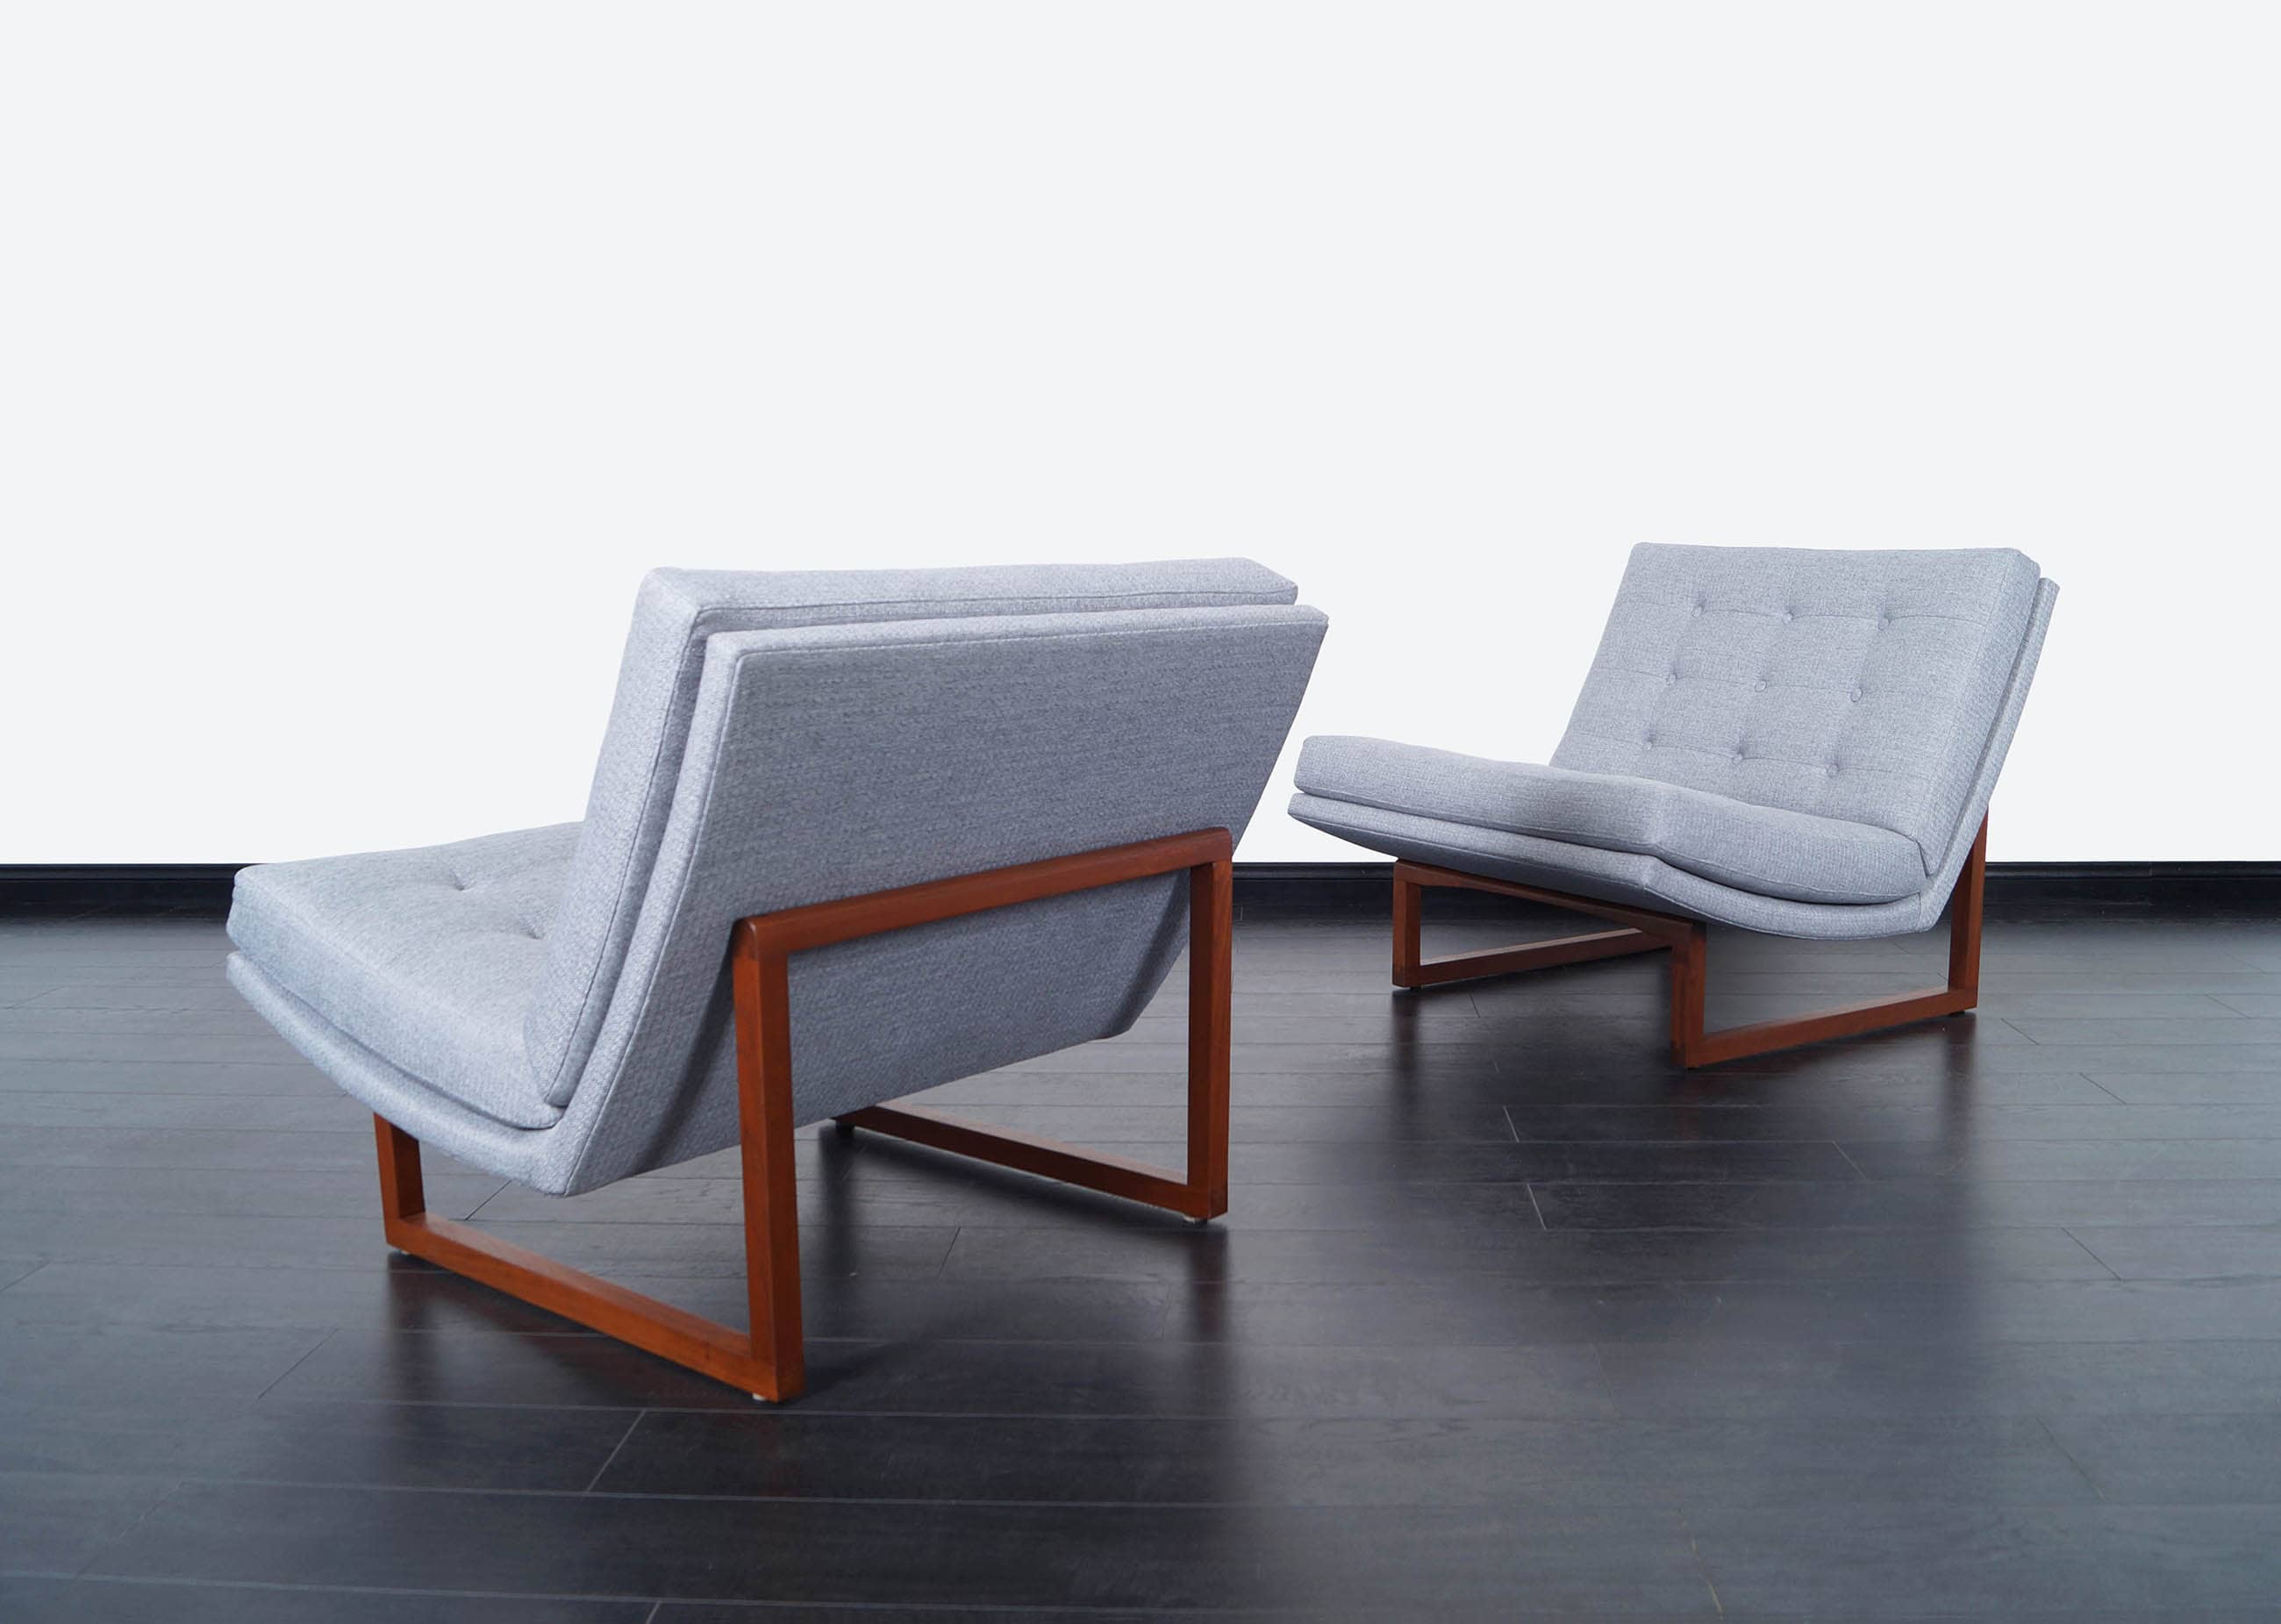 Vintage Tufted Walnut Lounge Chairs by Milo Baughman